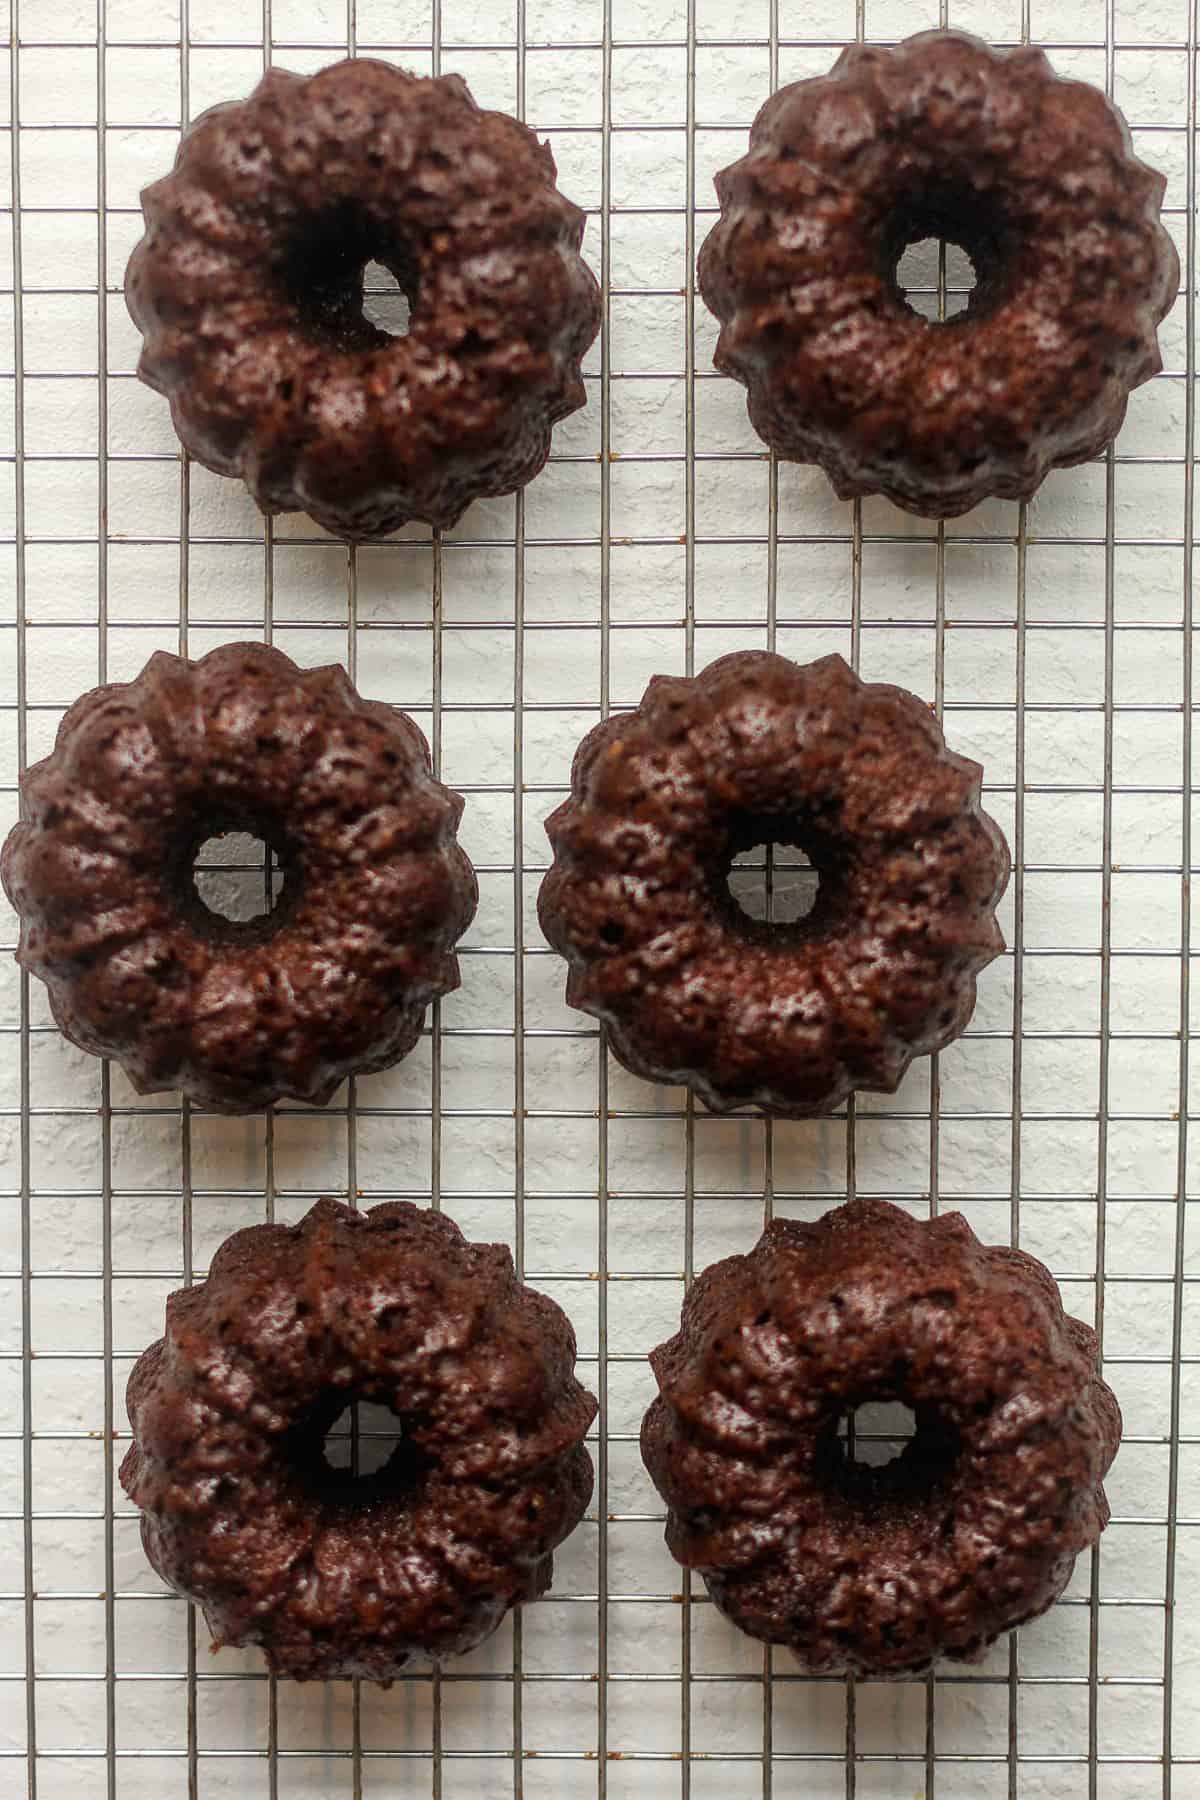 A wire rack of just baked chocolate bundt cakes - mini style.